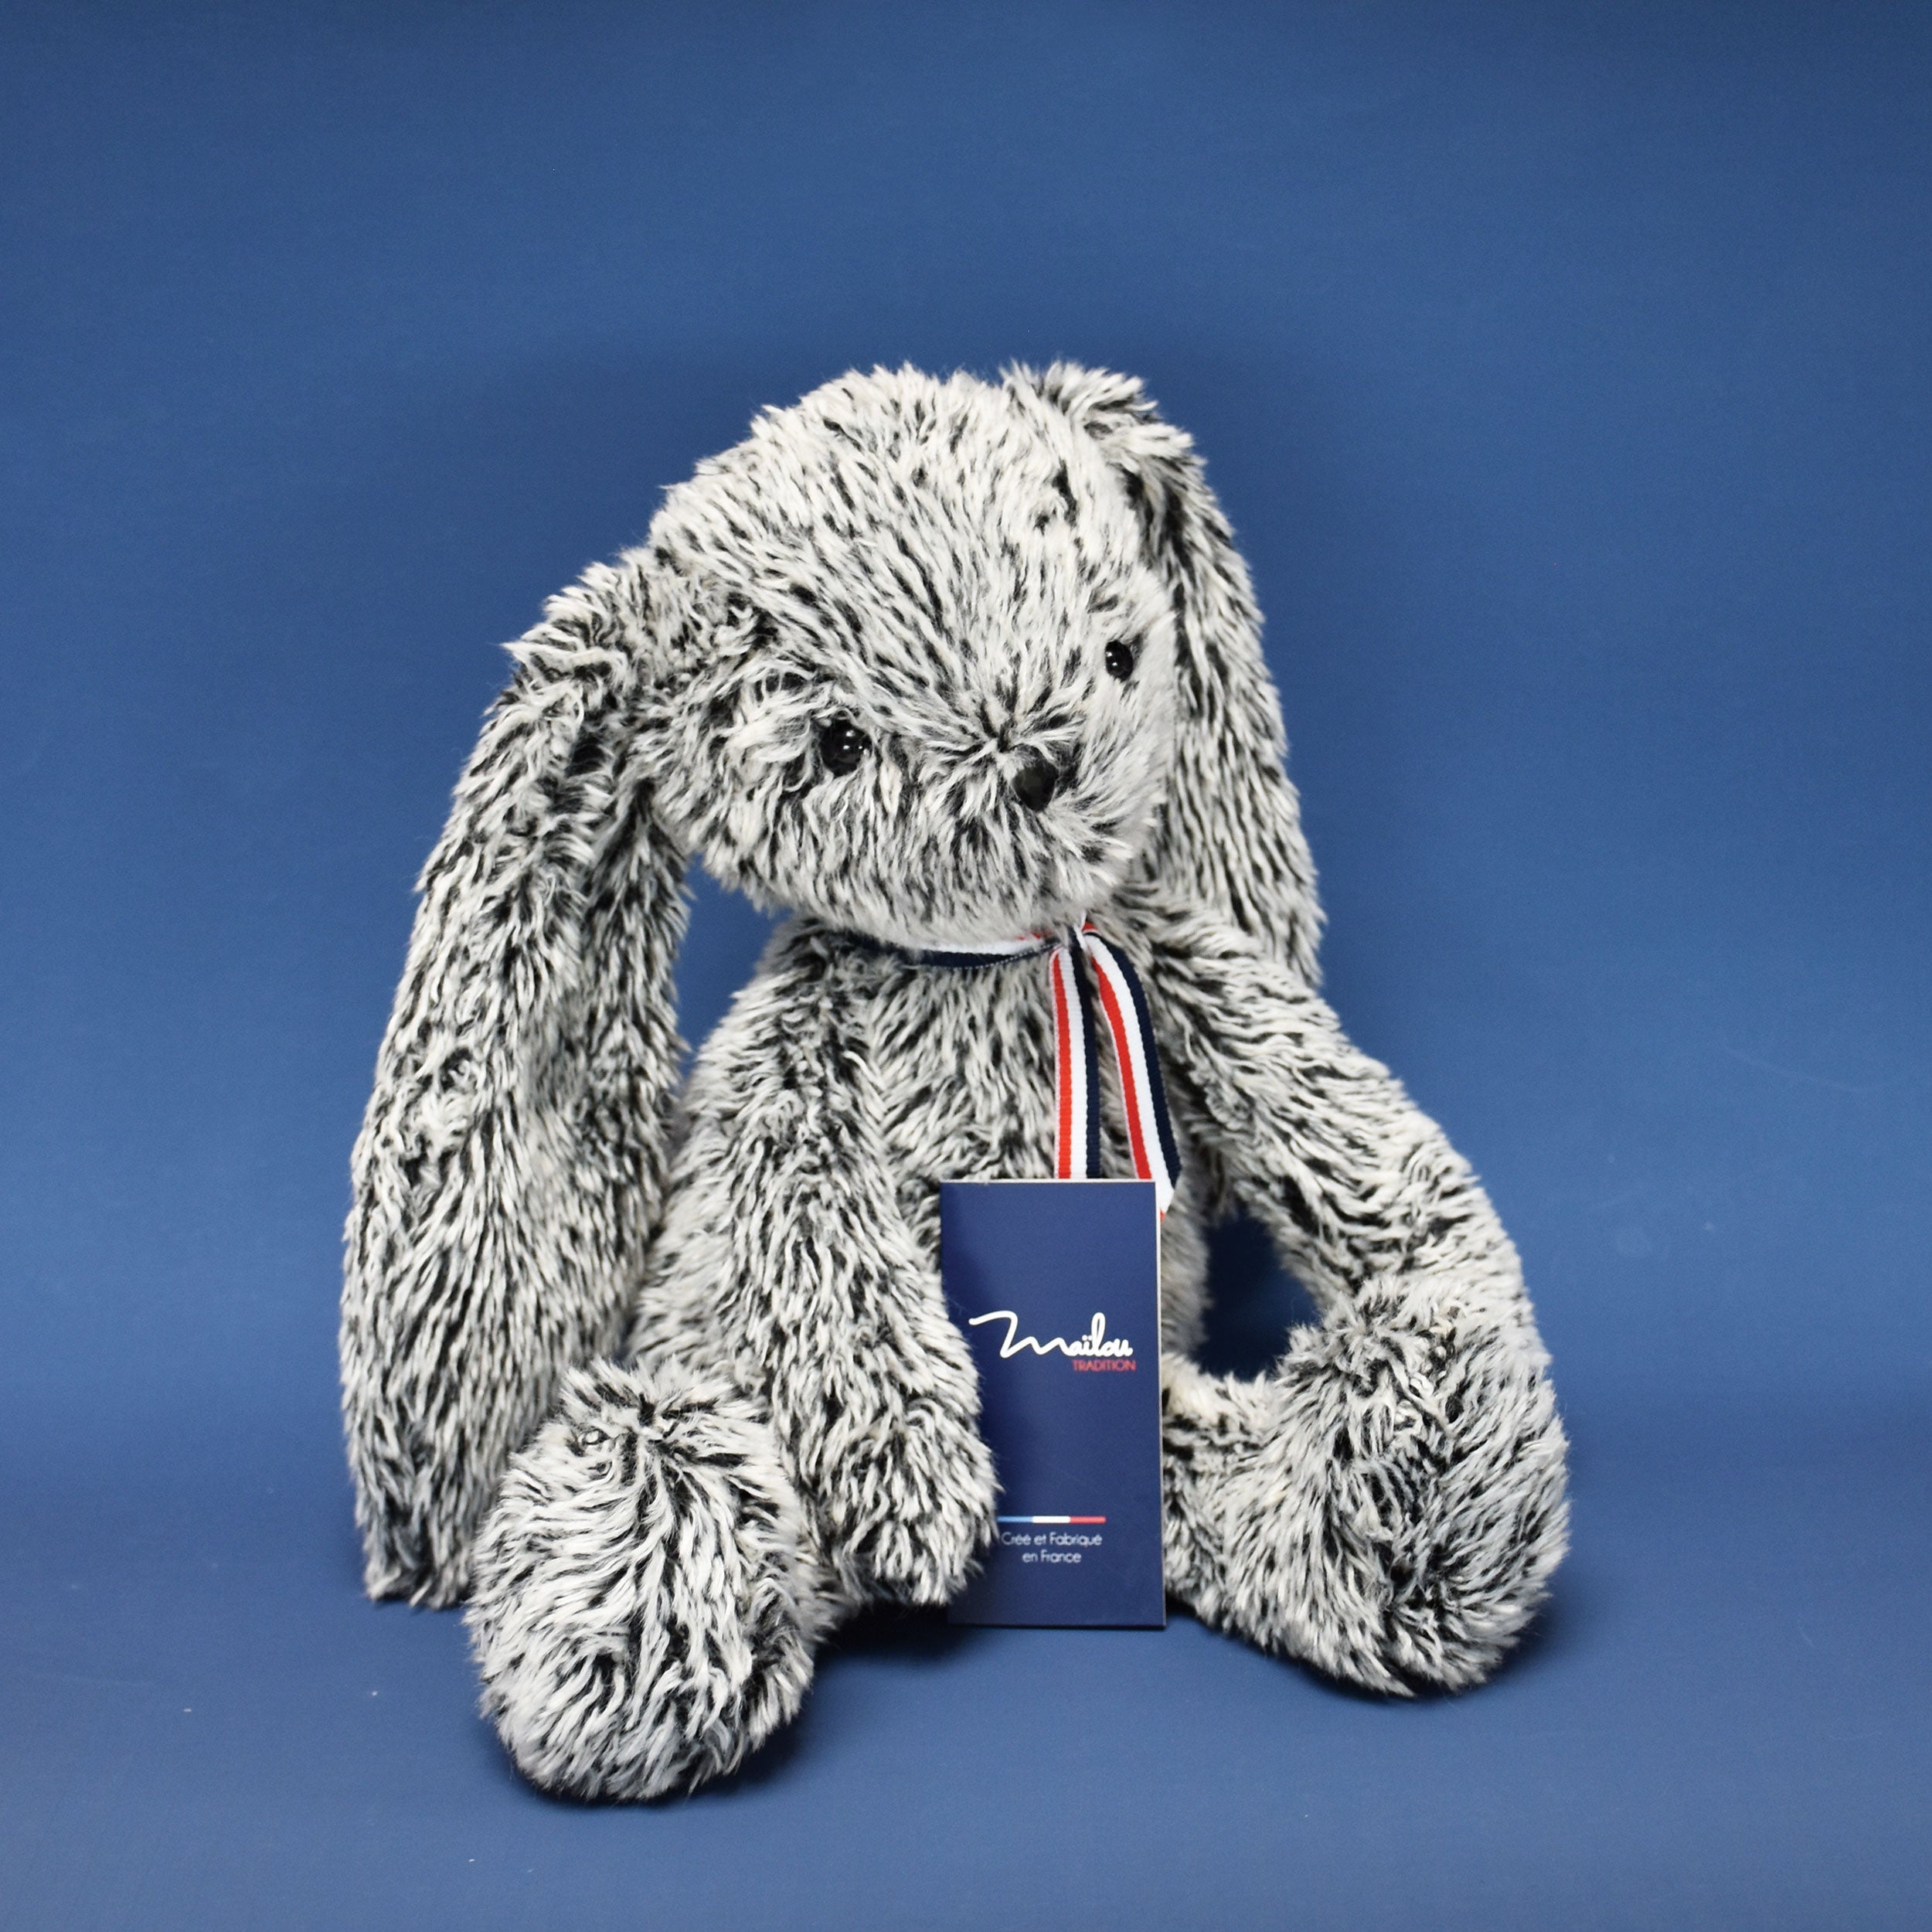 Peluche lapin made in france